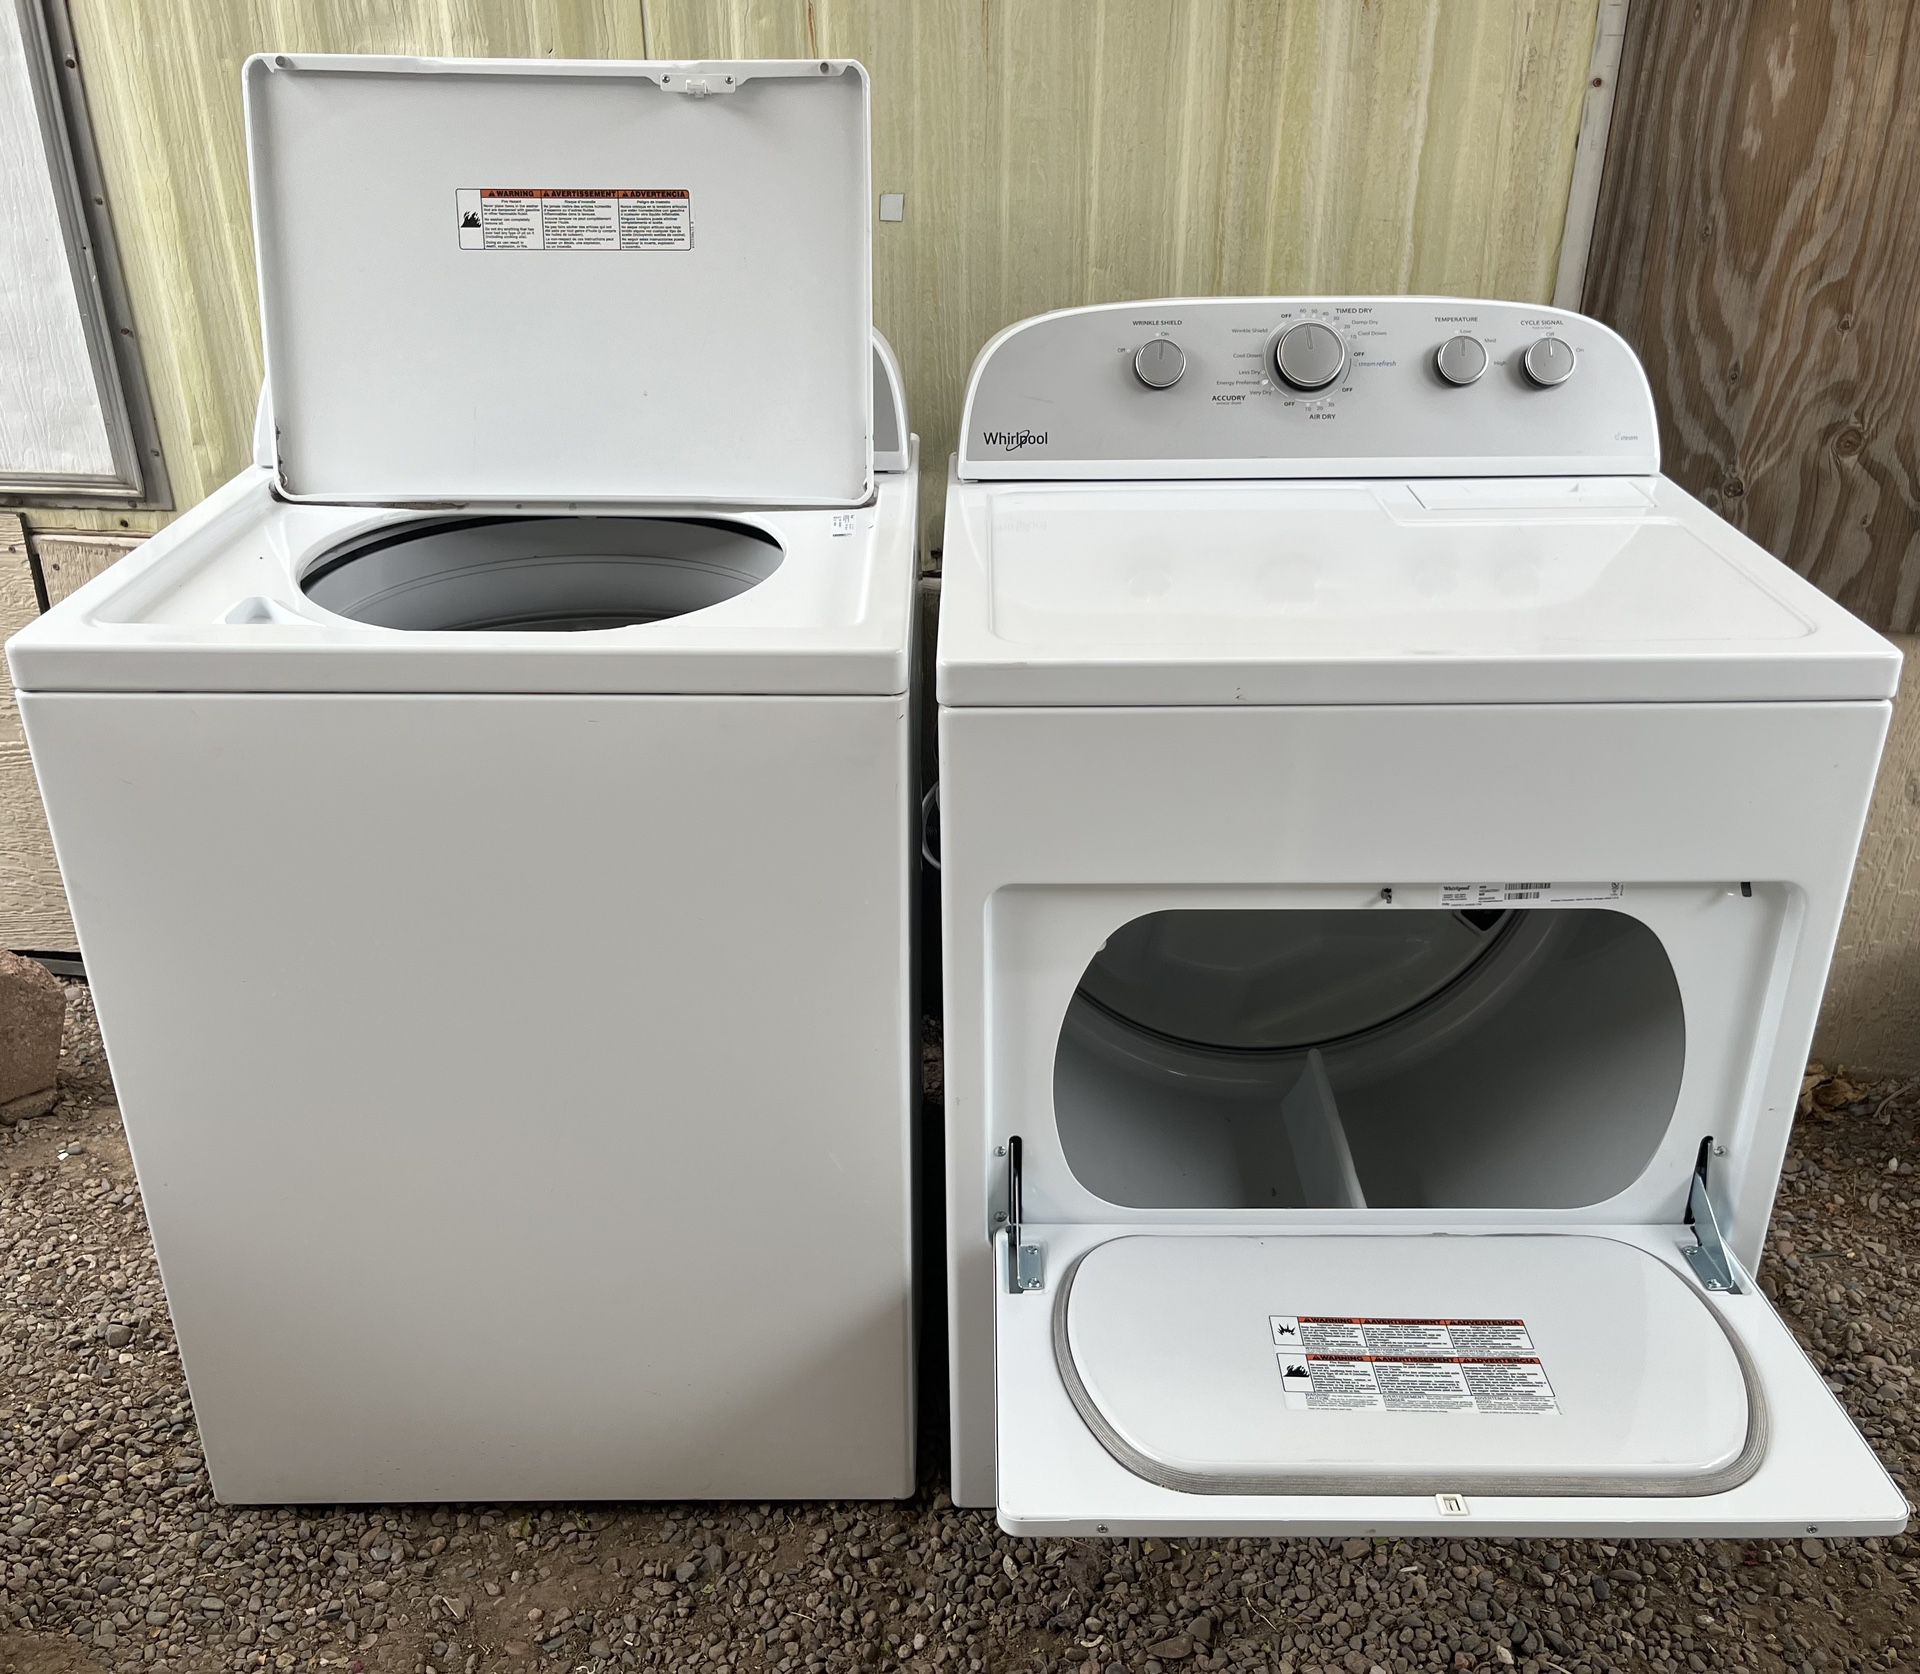 Washer And Dryer Set Whirlpool 